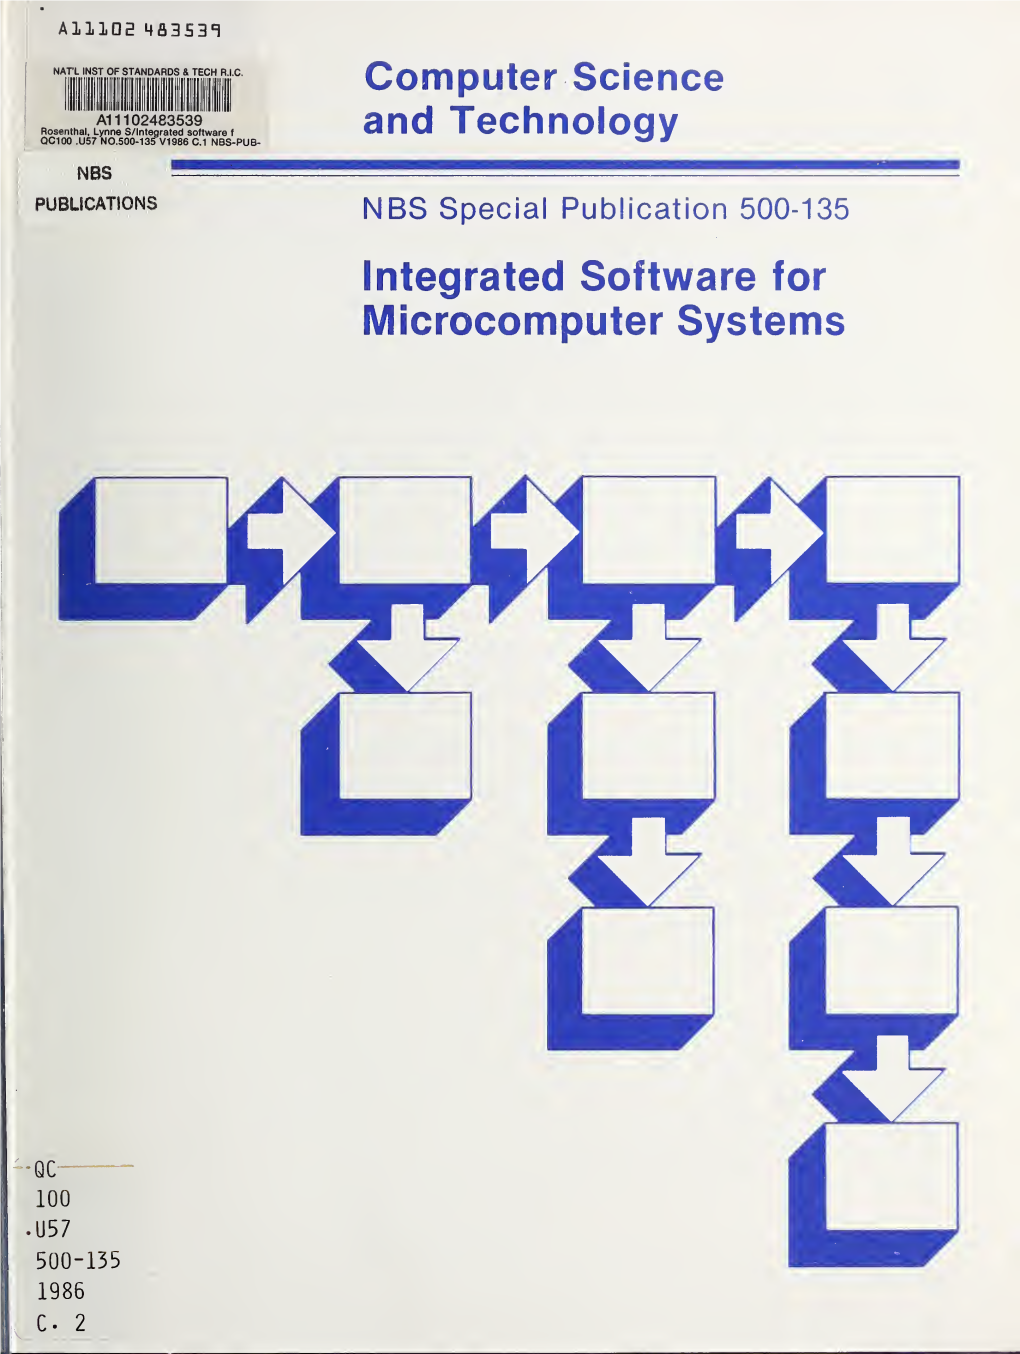 Integrated Software for Microcomputer Systems